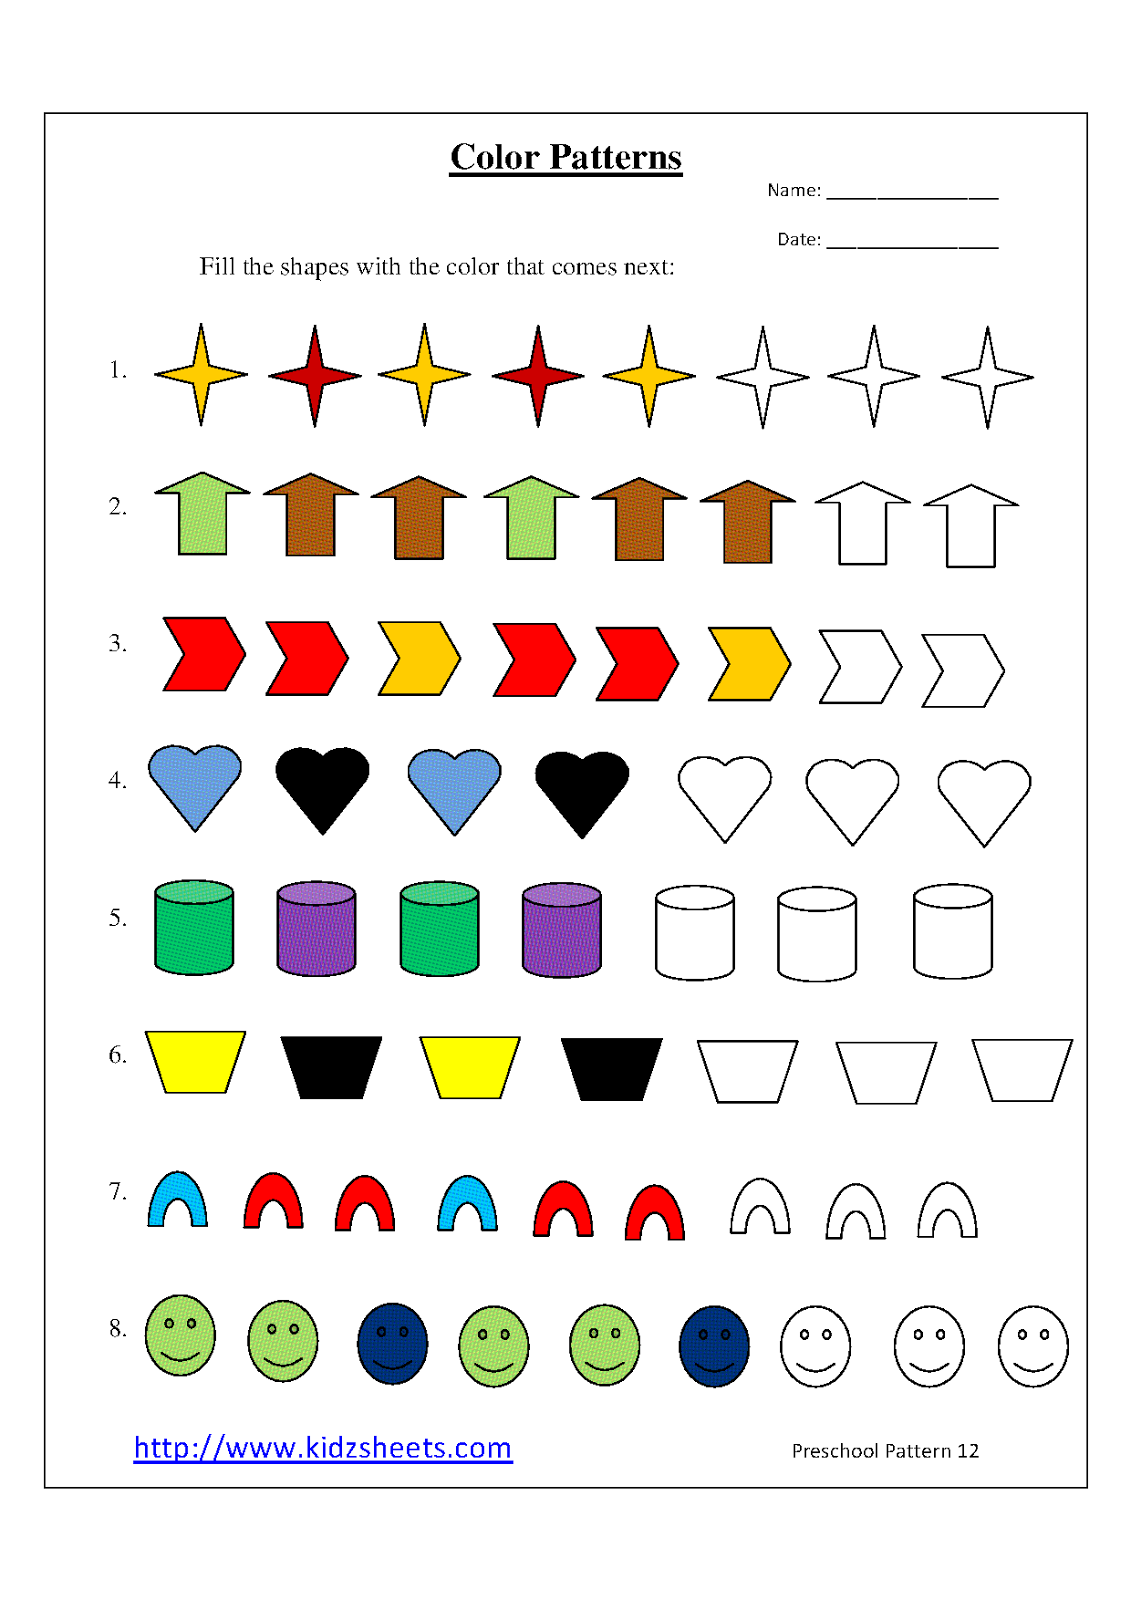 printable color pattern worksheets for preschool Worksheets preschool printable worksheet colors color matching activities preschoolers pre learning daycareworksheets match printables activity kids red school daycare print